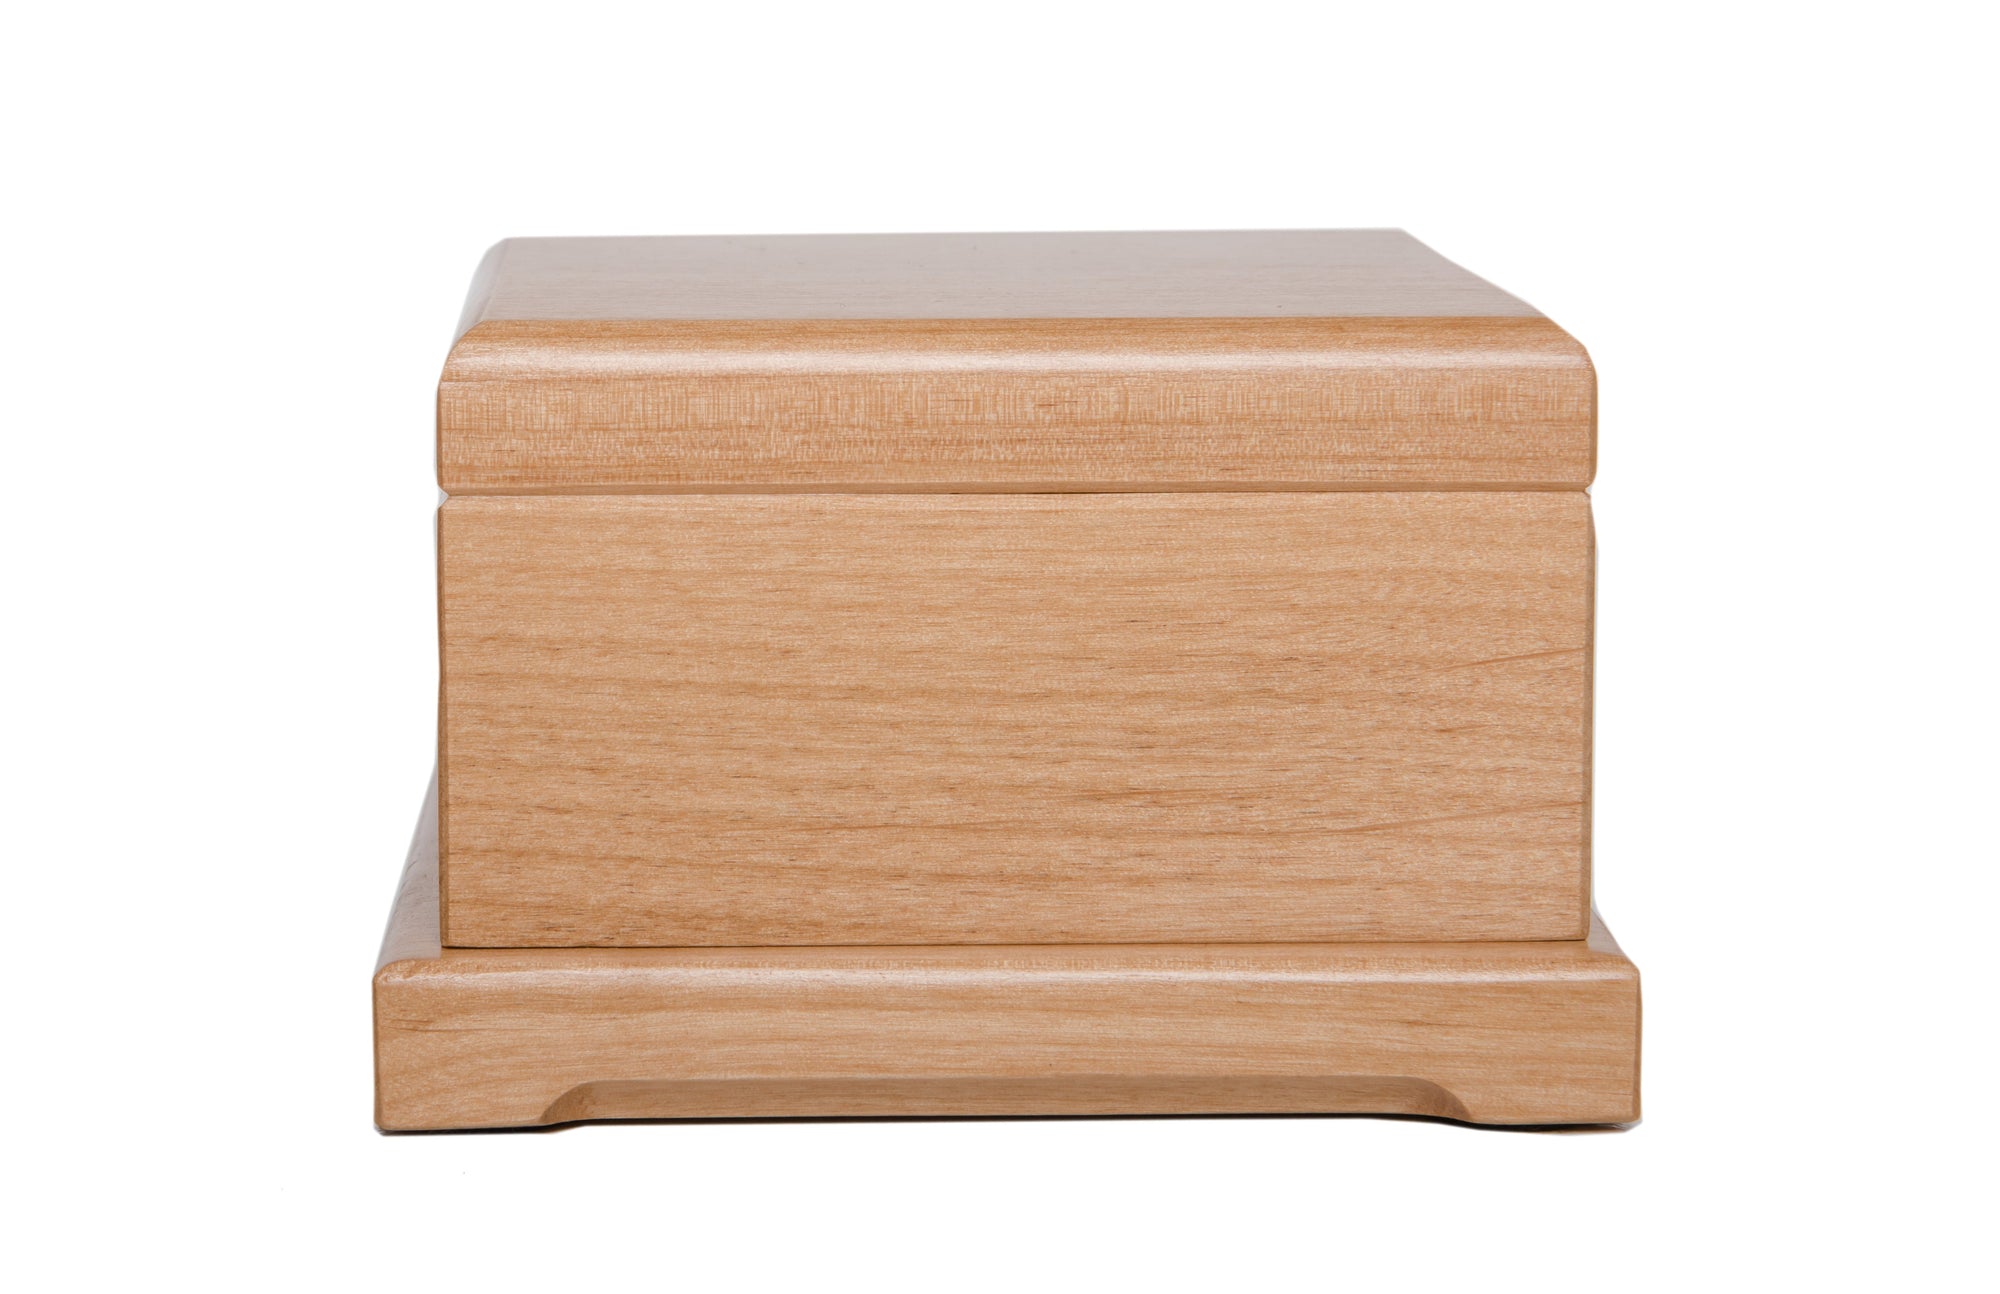 Pet Memorial Keepsake Urn Box for Dog or Cat - Because Someone We Love Is In Heaven